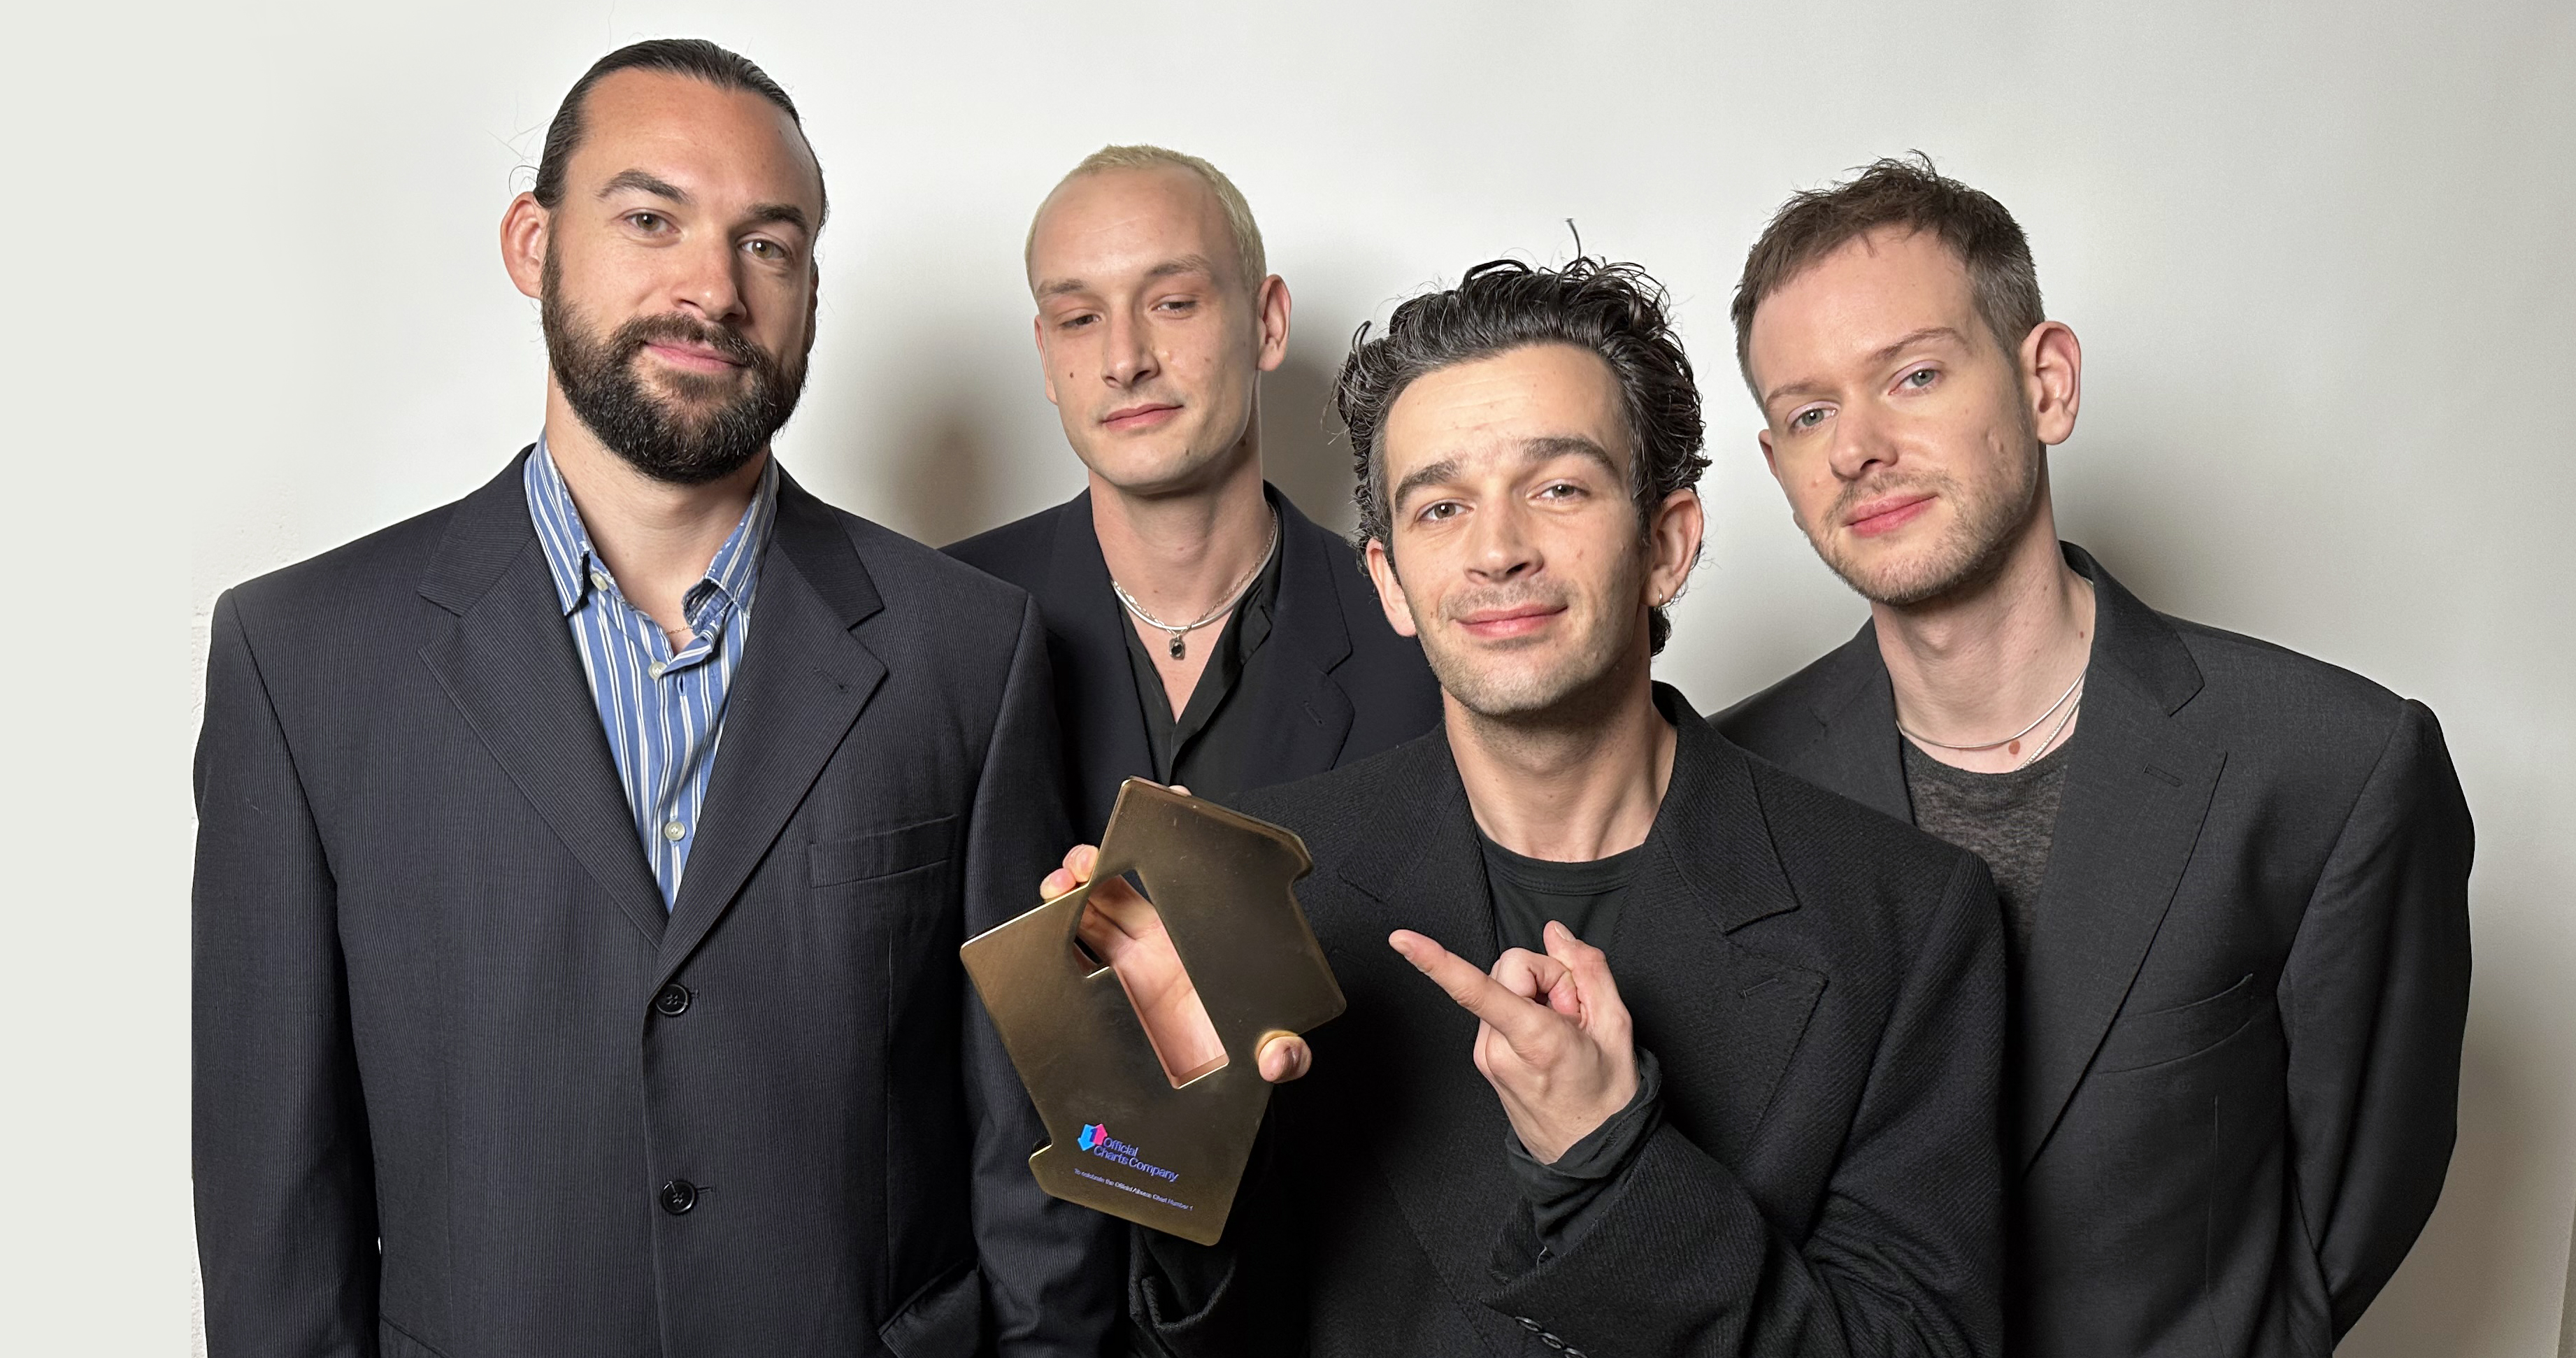 The 1975 score fifth consecutive Number 1 album with Being Funny ...